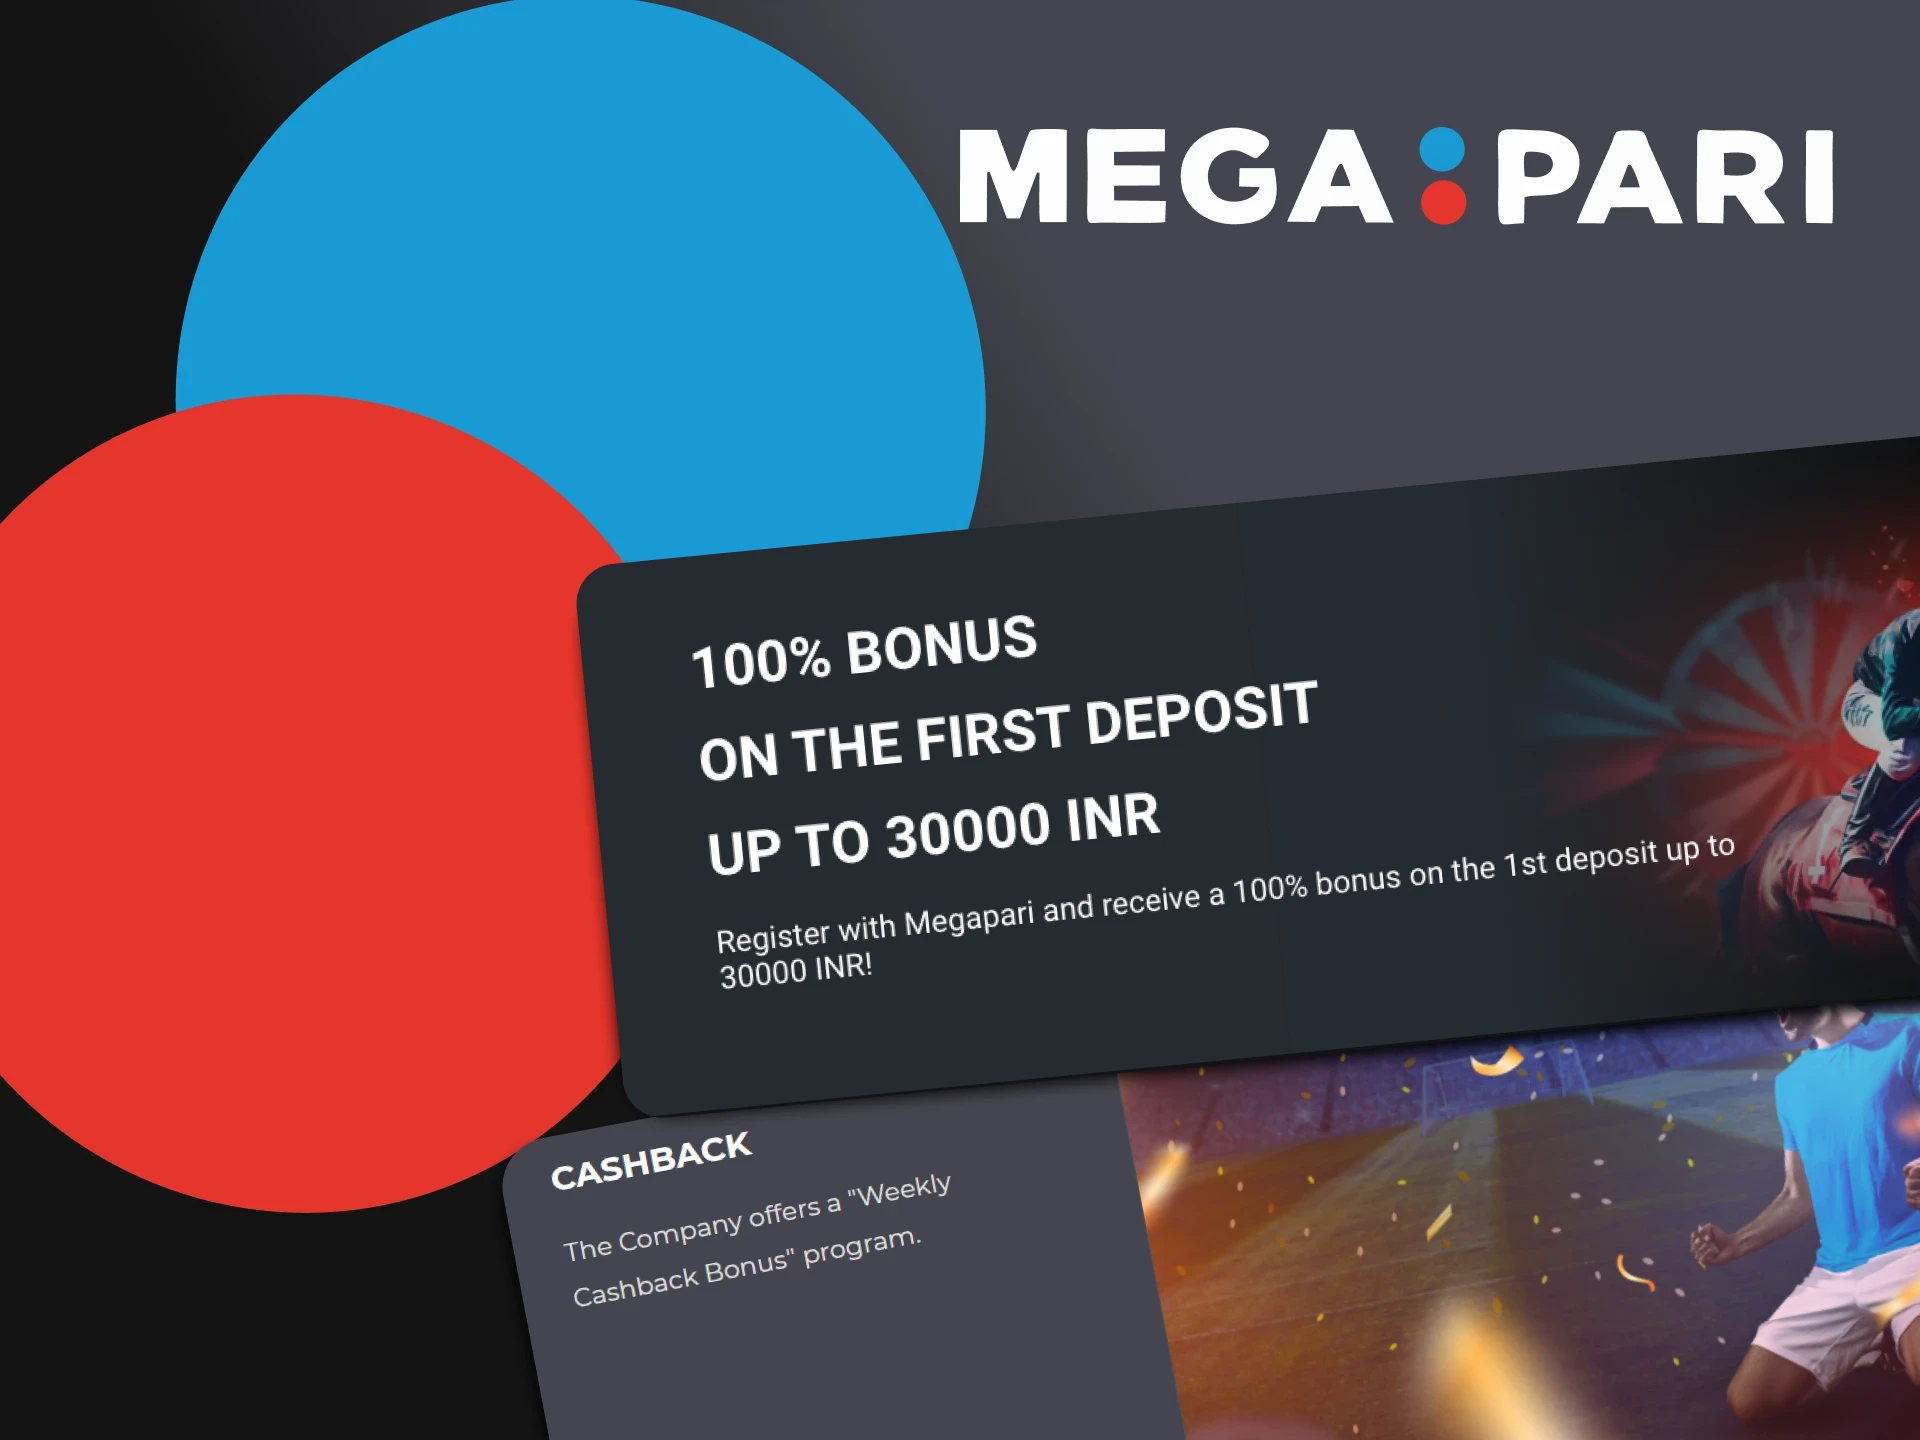 Megapari gives various bonuses to its existing users.